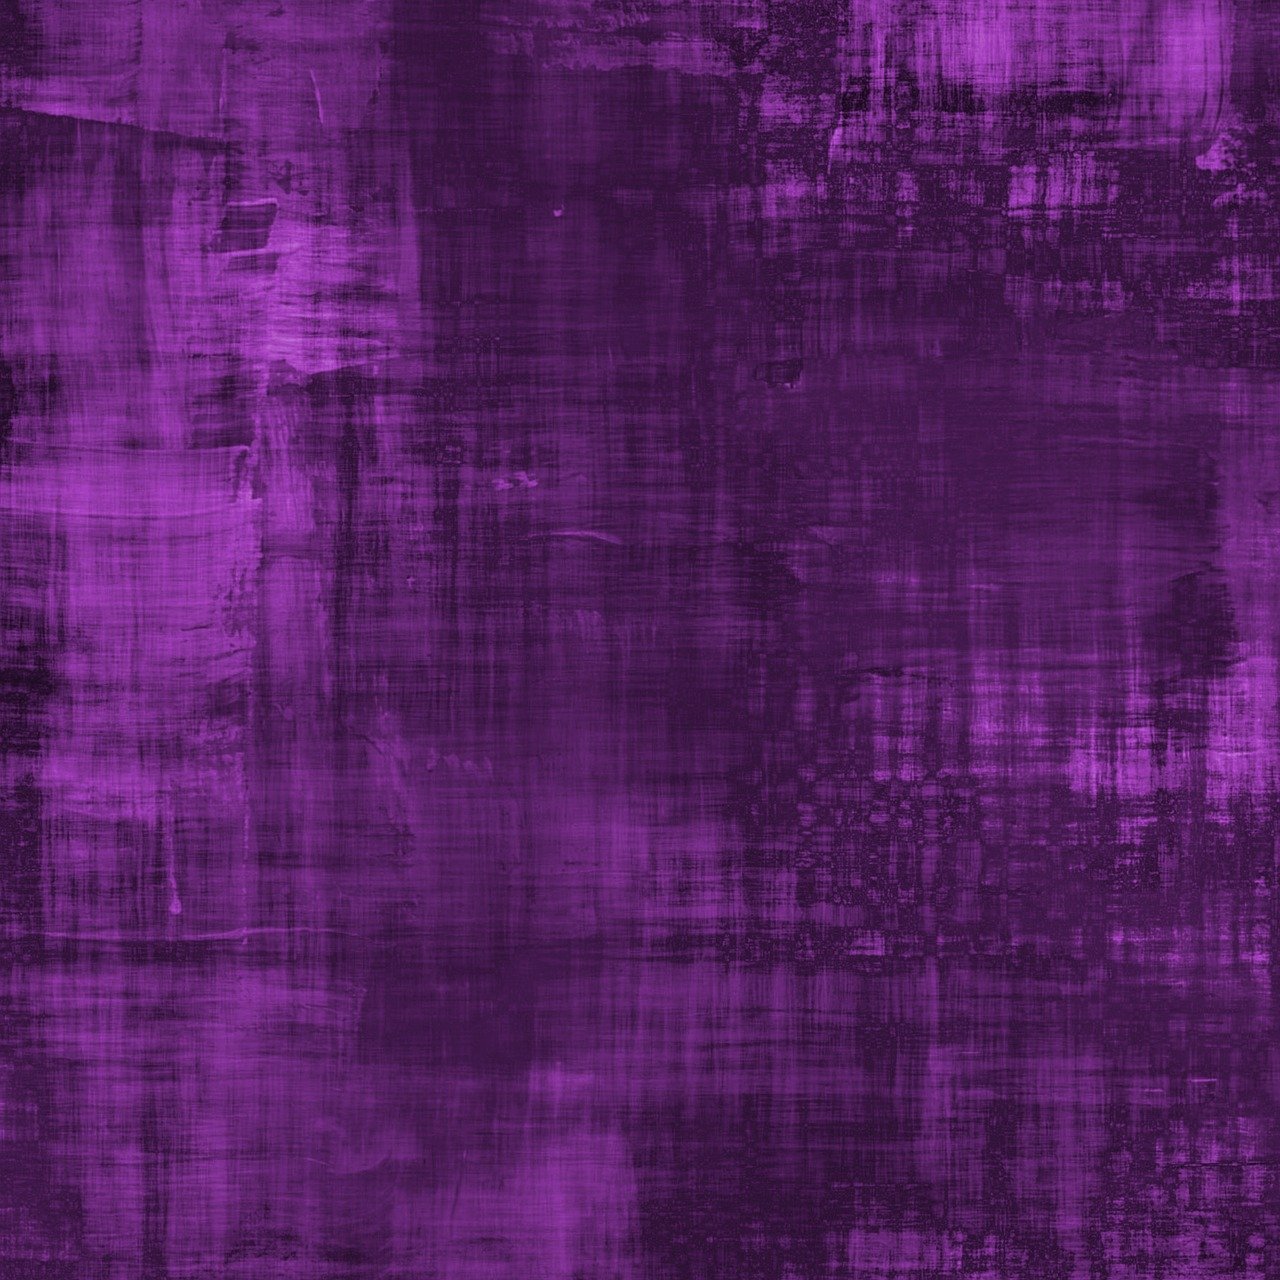 a close up of a purple painting on a wall, a digital rendering, abstract expressionism, gloomy medieval background, repeating fabric pattern, high res, crosshatch sketch gradient